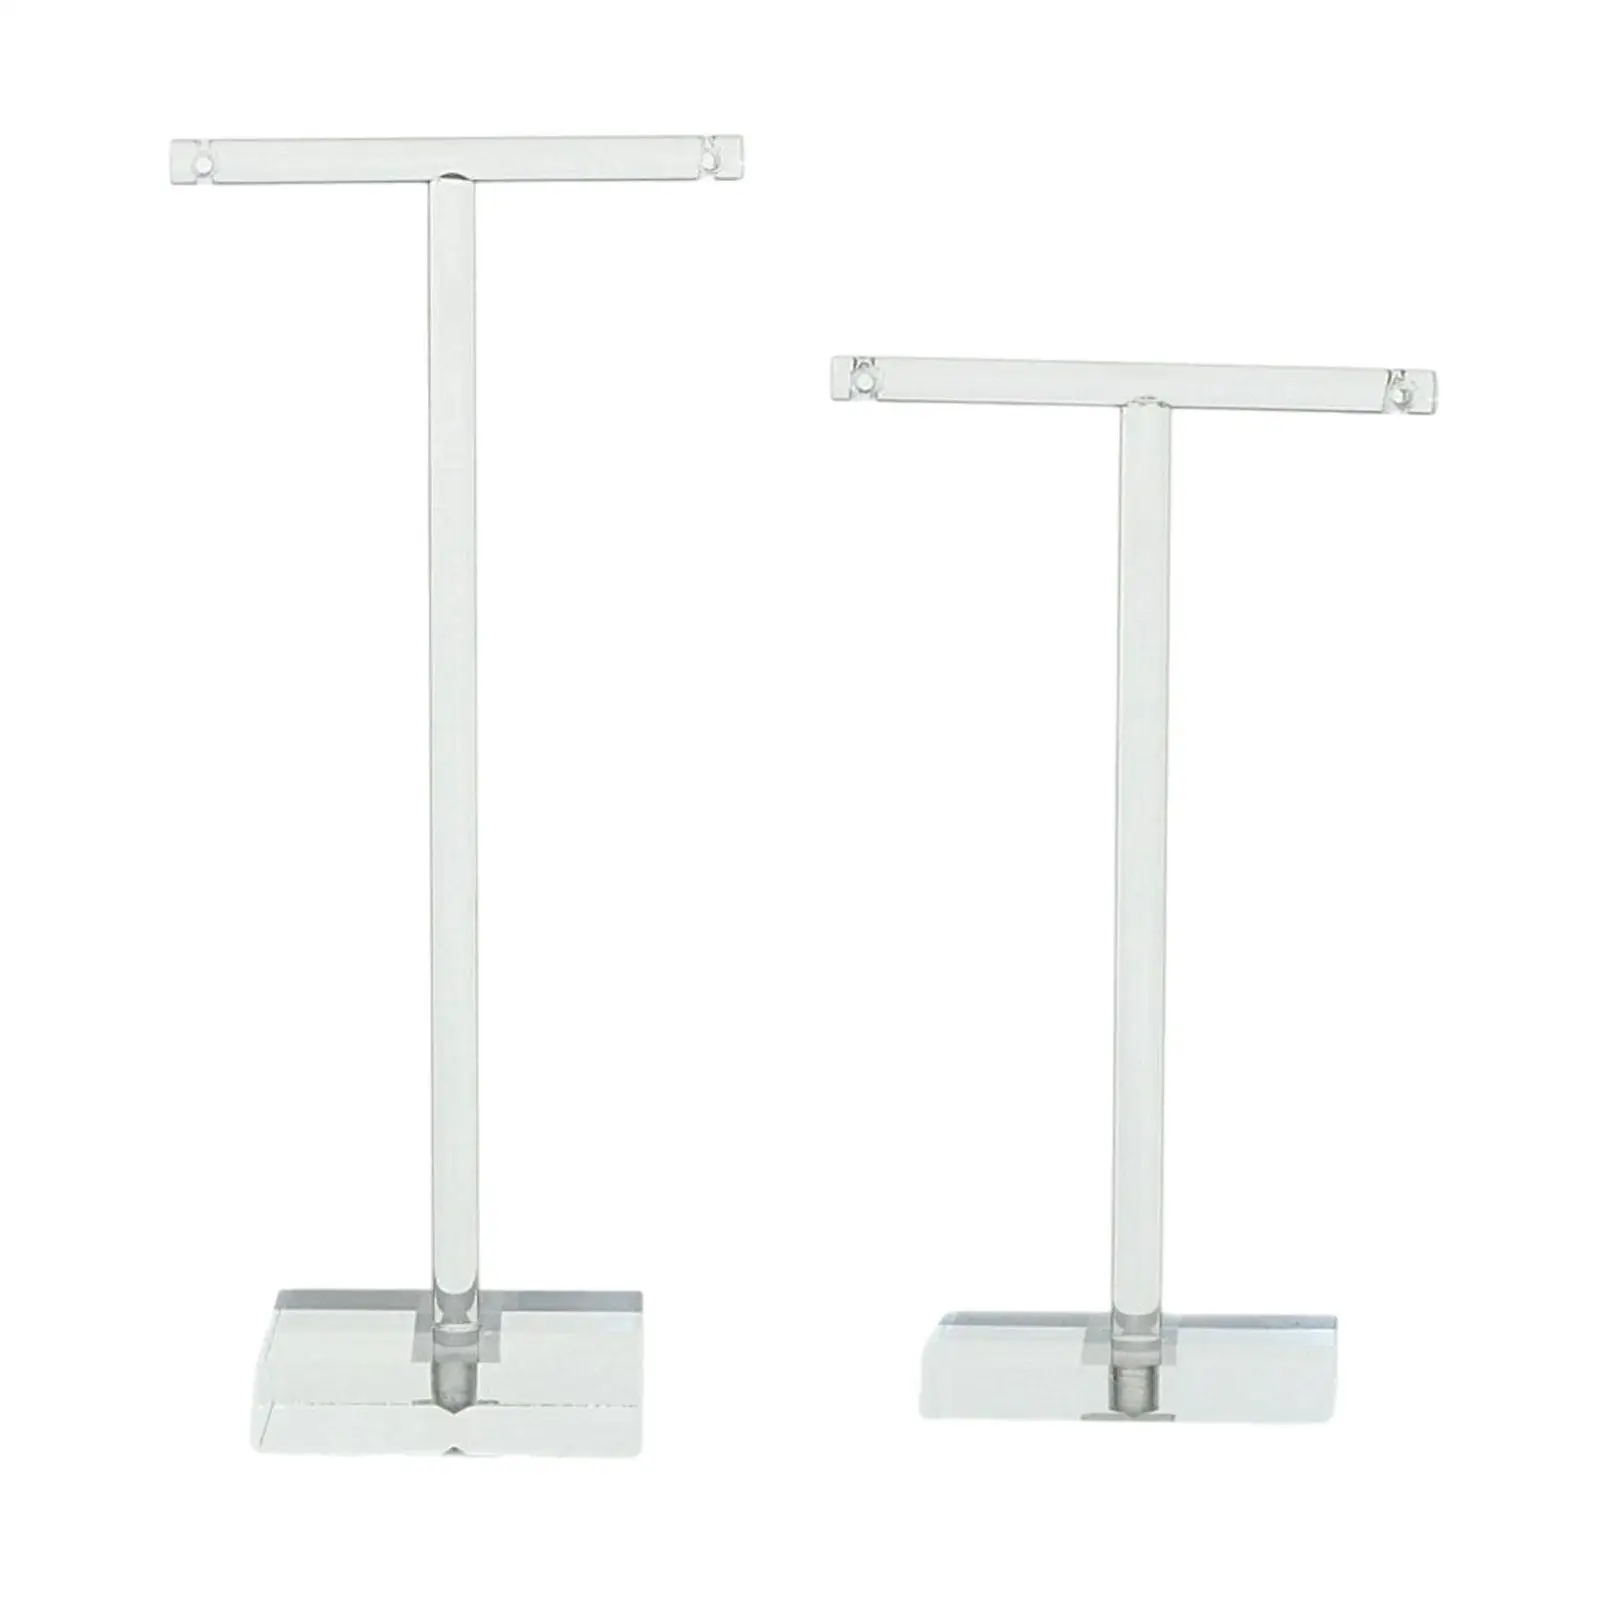 2 Pieces Jewelry Organizer T Bar Stable Base Acrylic Earring Stand Earring Display Stand for Desktop Home Vanity Store Dresser